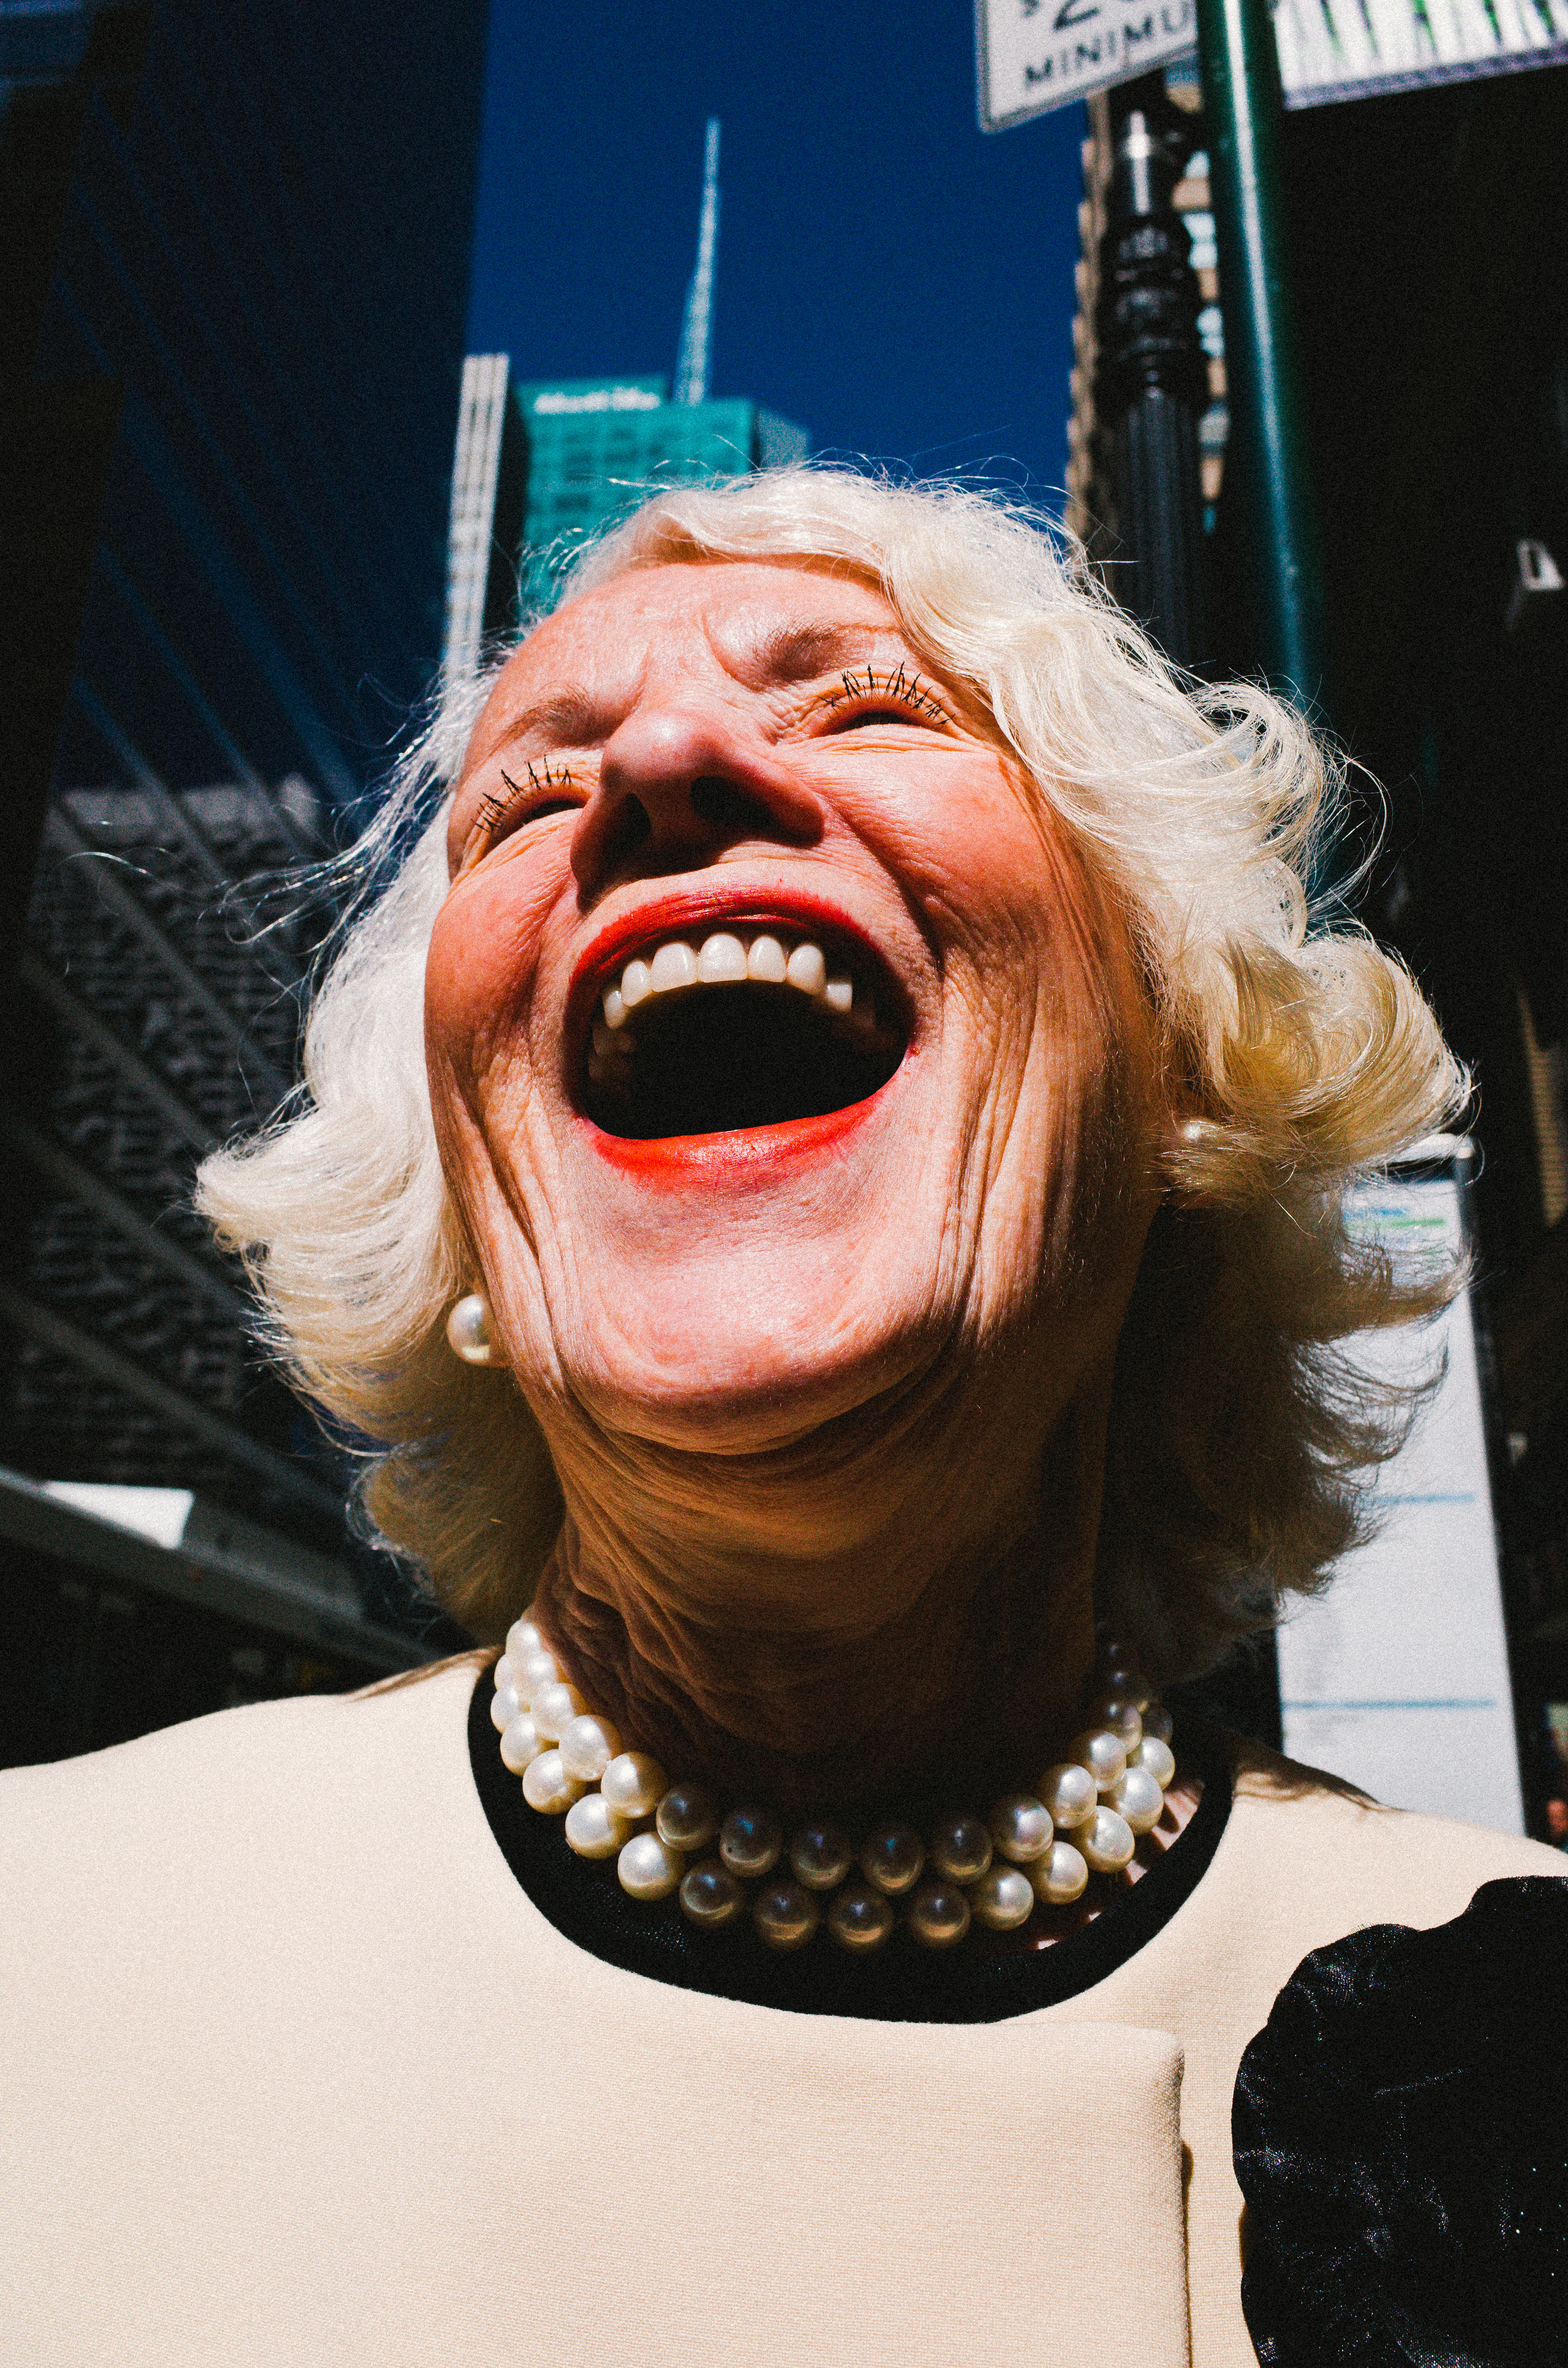 Laughing lady. NYC, 2015